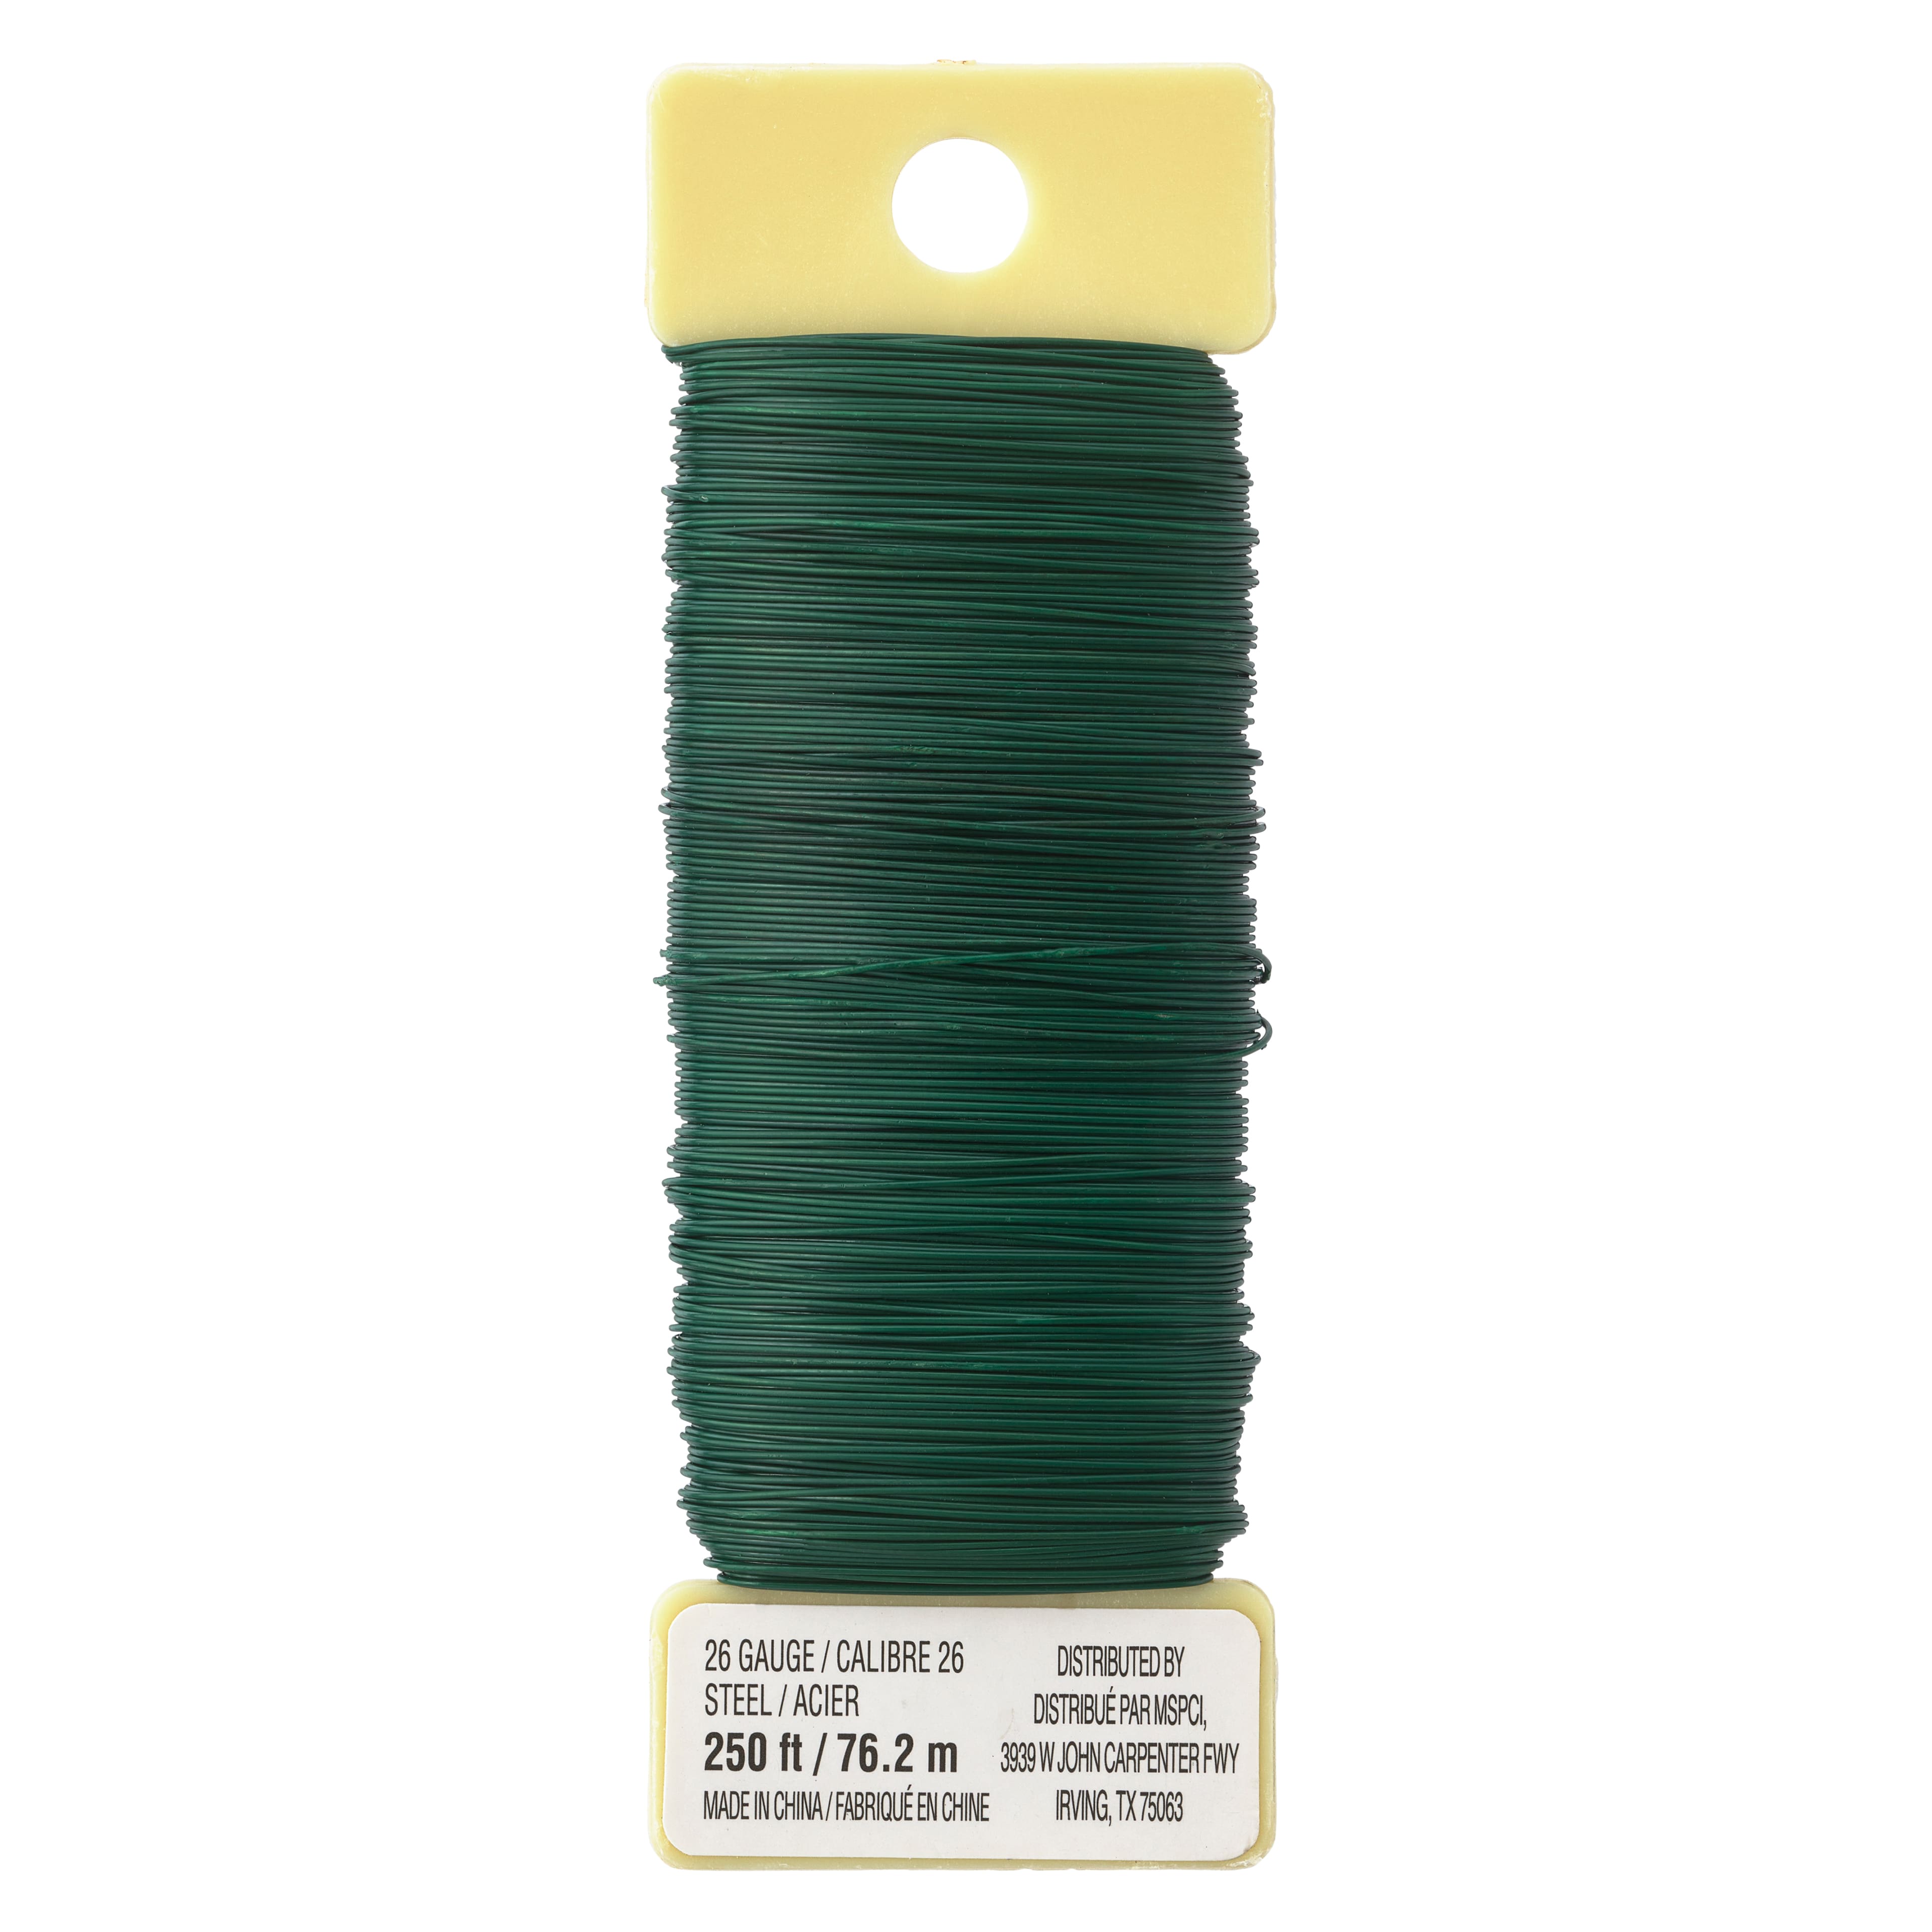 Paddle Wire 26 Gauge, Wholesale Floral Wire - Wholesale Flowers and Supplies